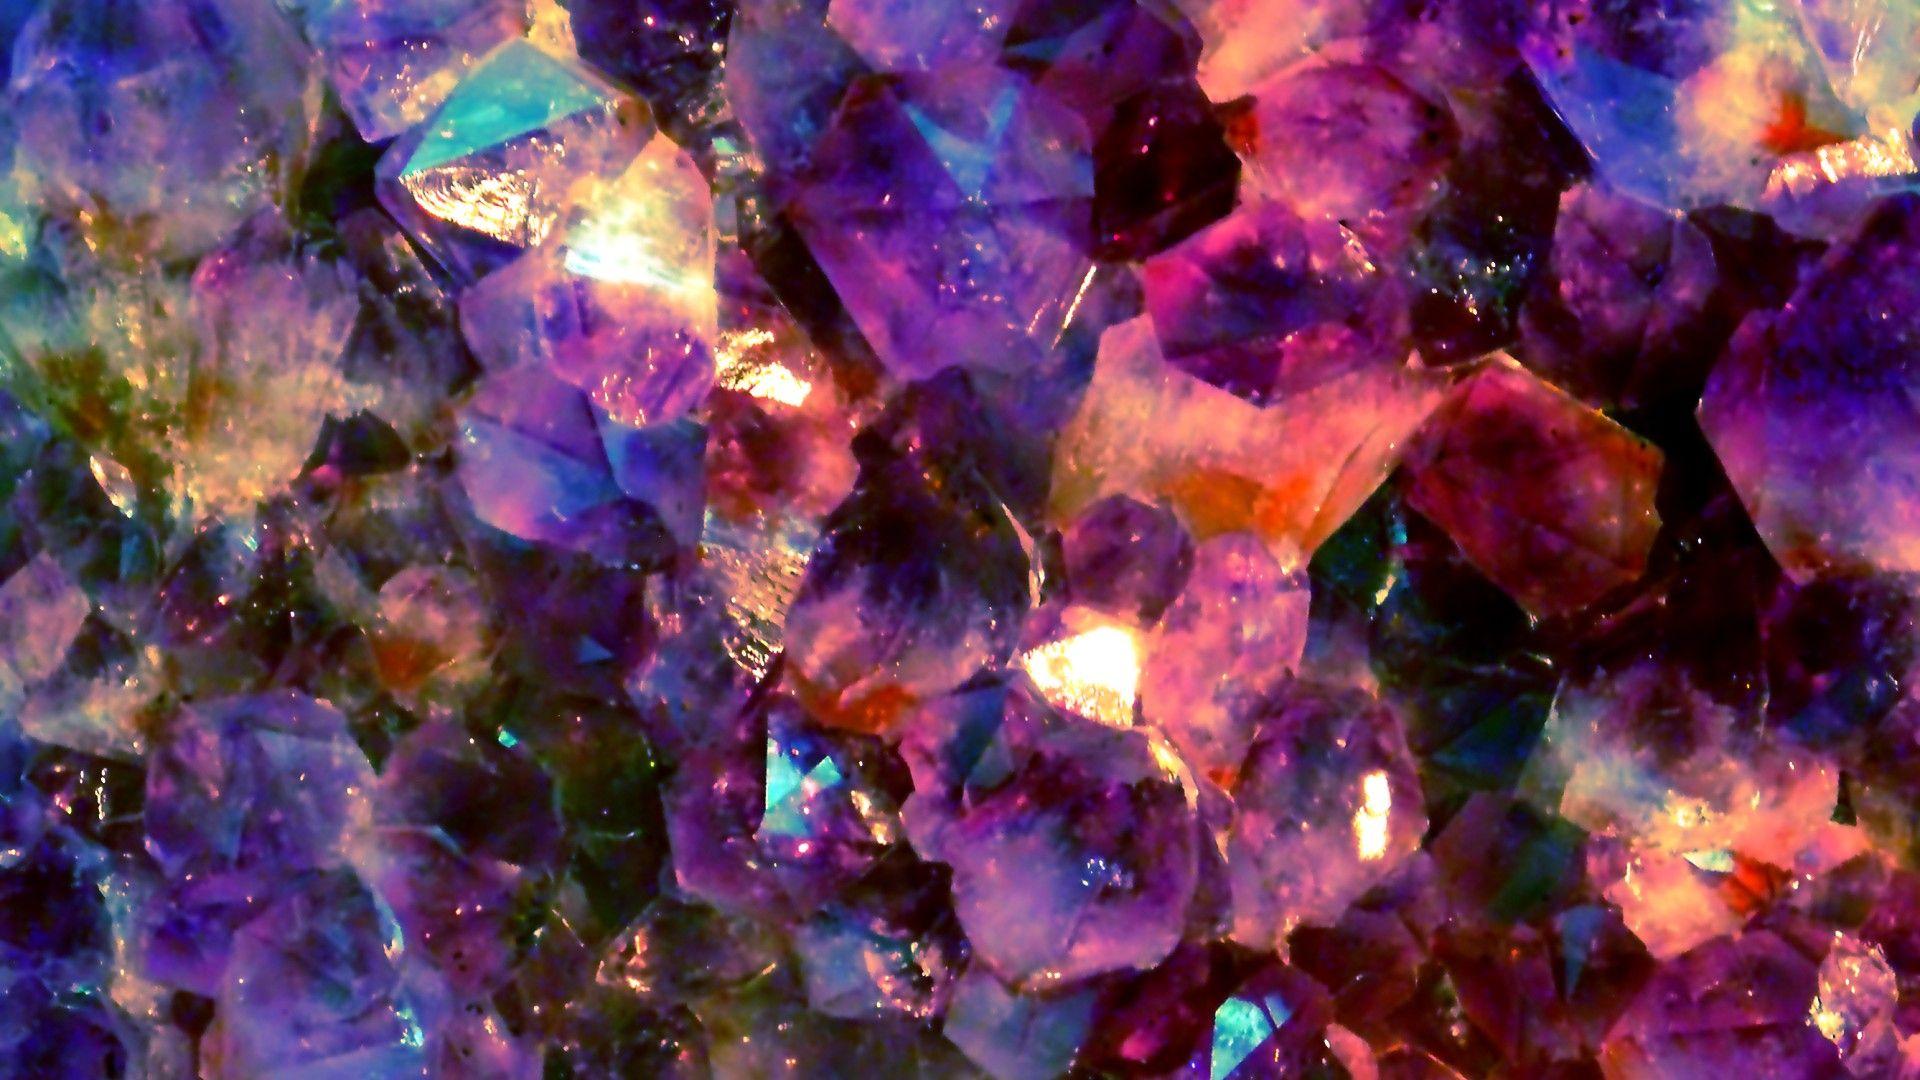 Wallpaper ID: 653762 / no people, 4K, quartz, close-up, flower, white  background, food and drink, geology, cristal, purple, rock, amethyst,  indoors, semi-precious gem, copy space Wallpaper